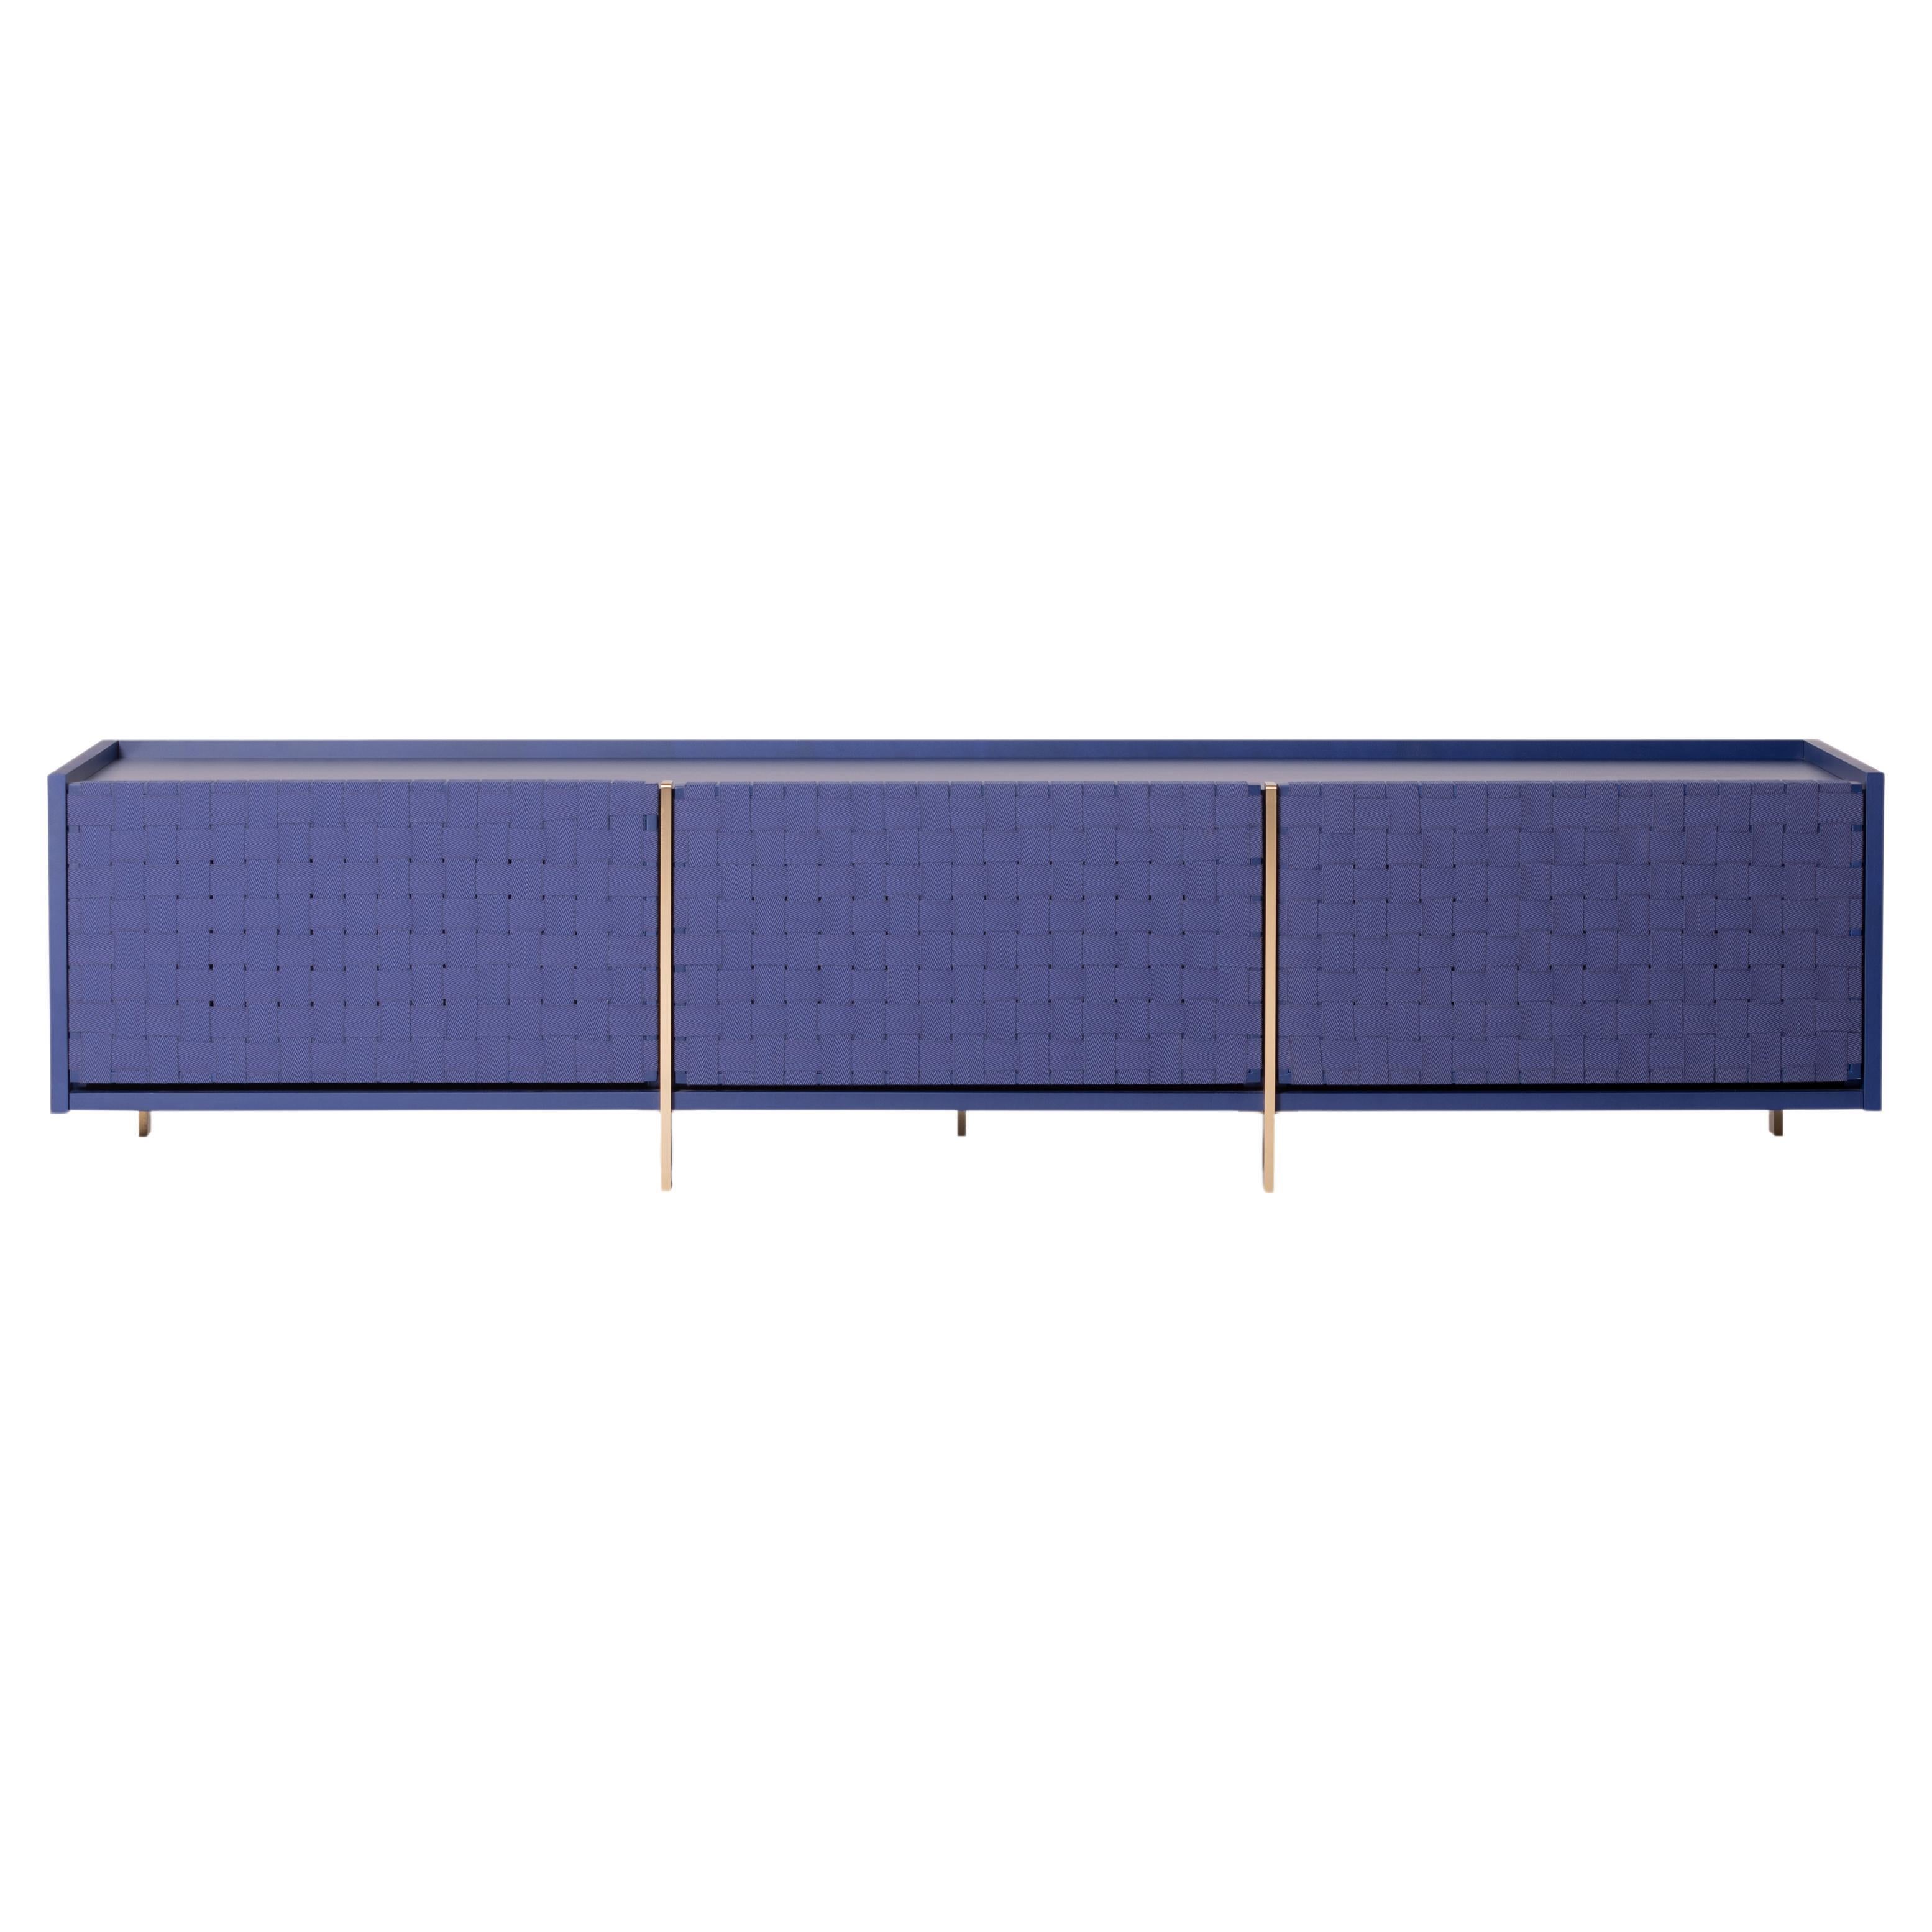 Contemporary Sideboard, Credenza in Veneered Wood, Solid Wood and Ribbon